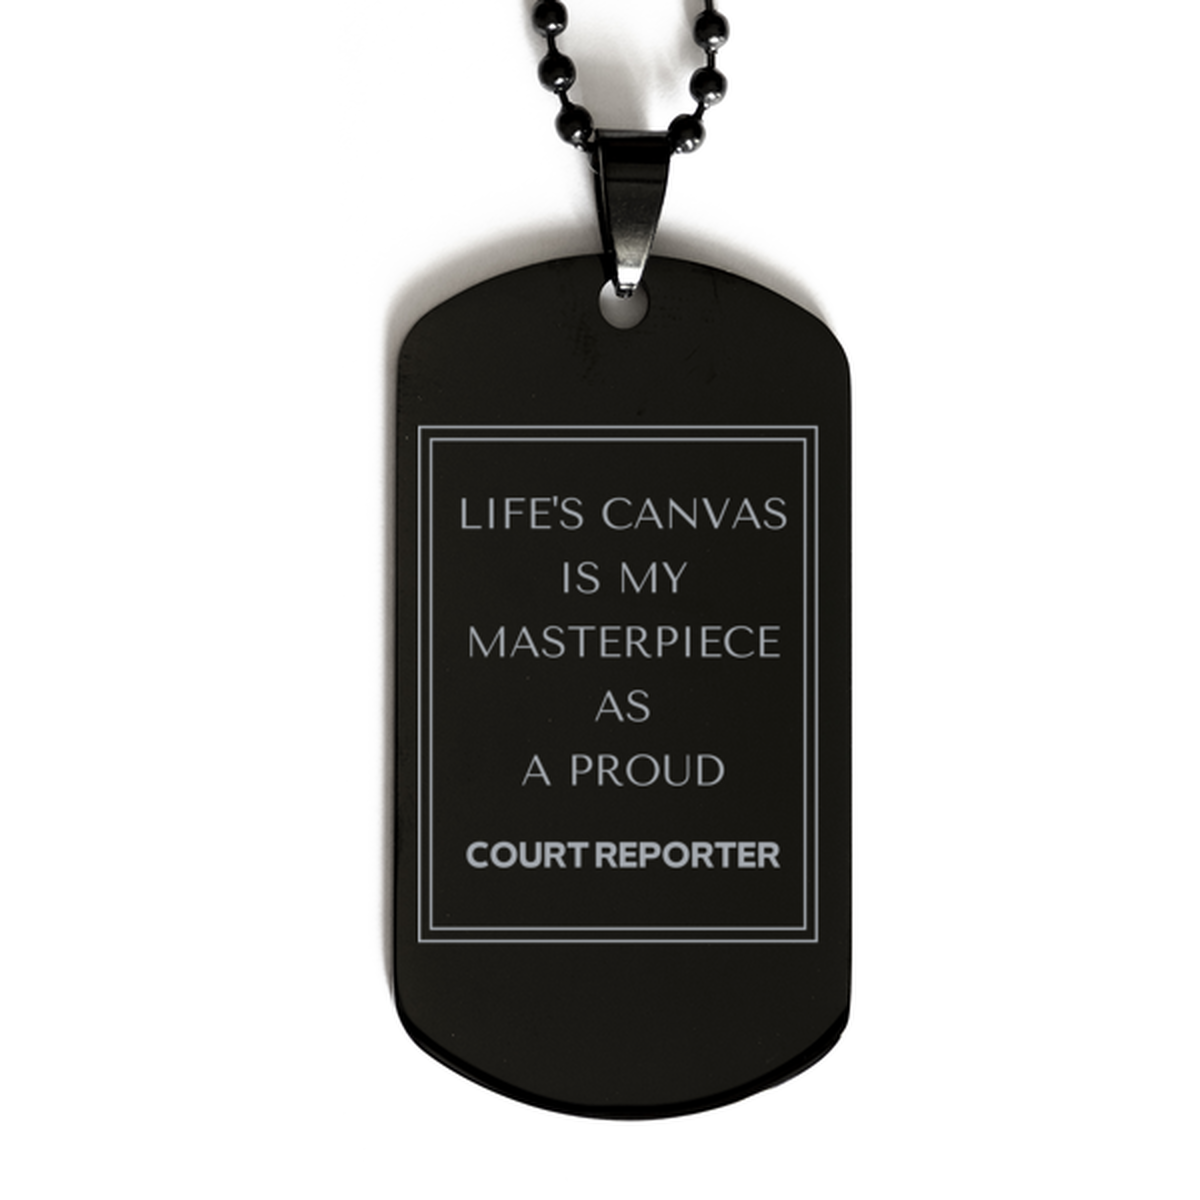 Proud Court Reporter Gifts, Life's canvas is my masterpiece, Epic Birthday Christmas Unique Black Dog Tag For Court Reporter, Coworkers, Men, Women, Friends